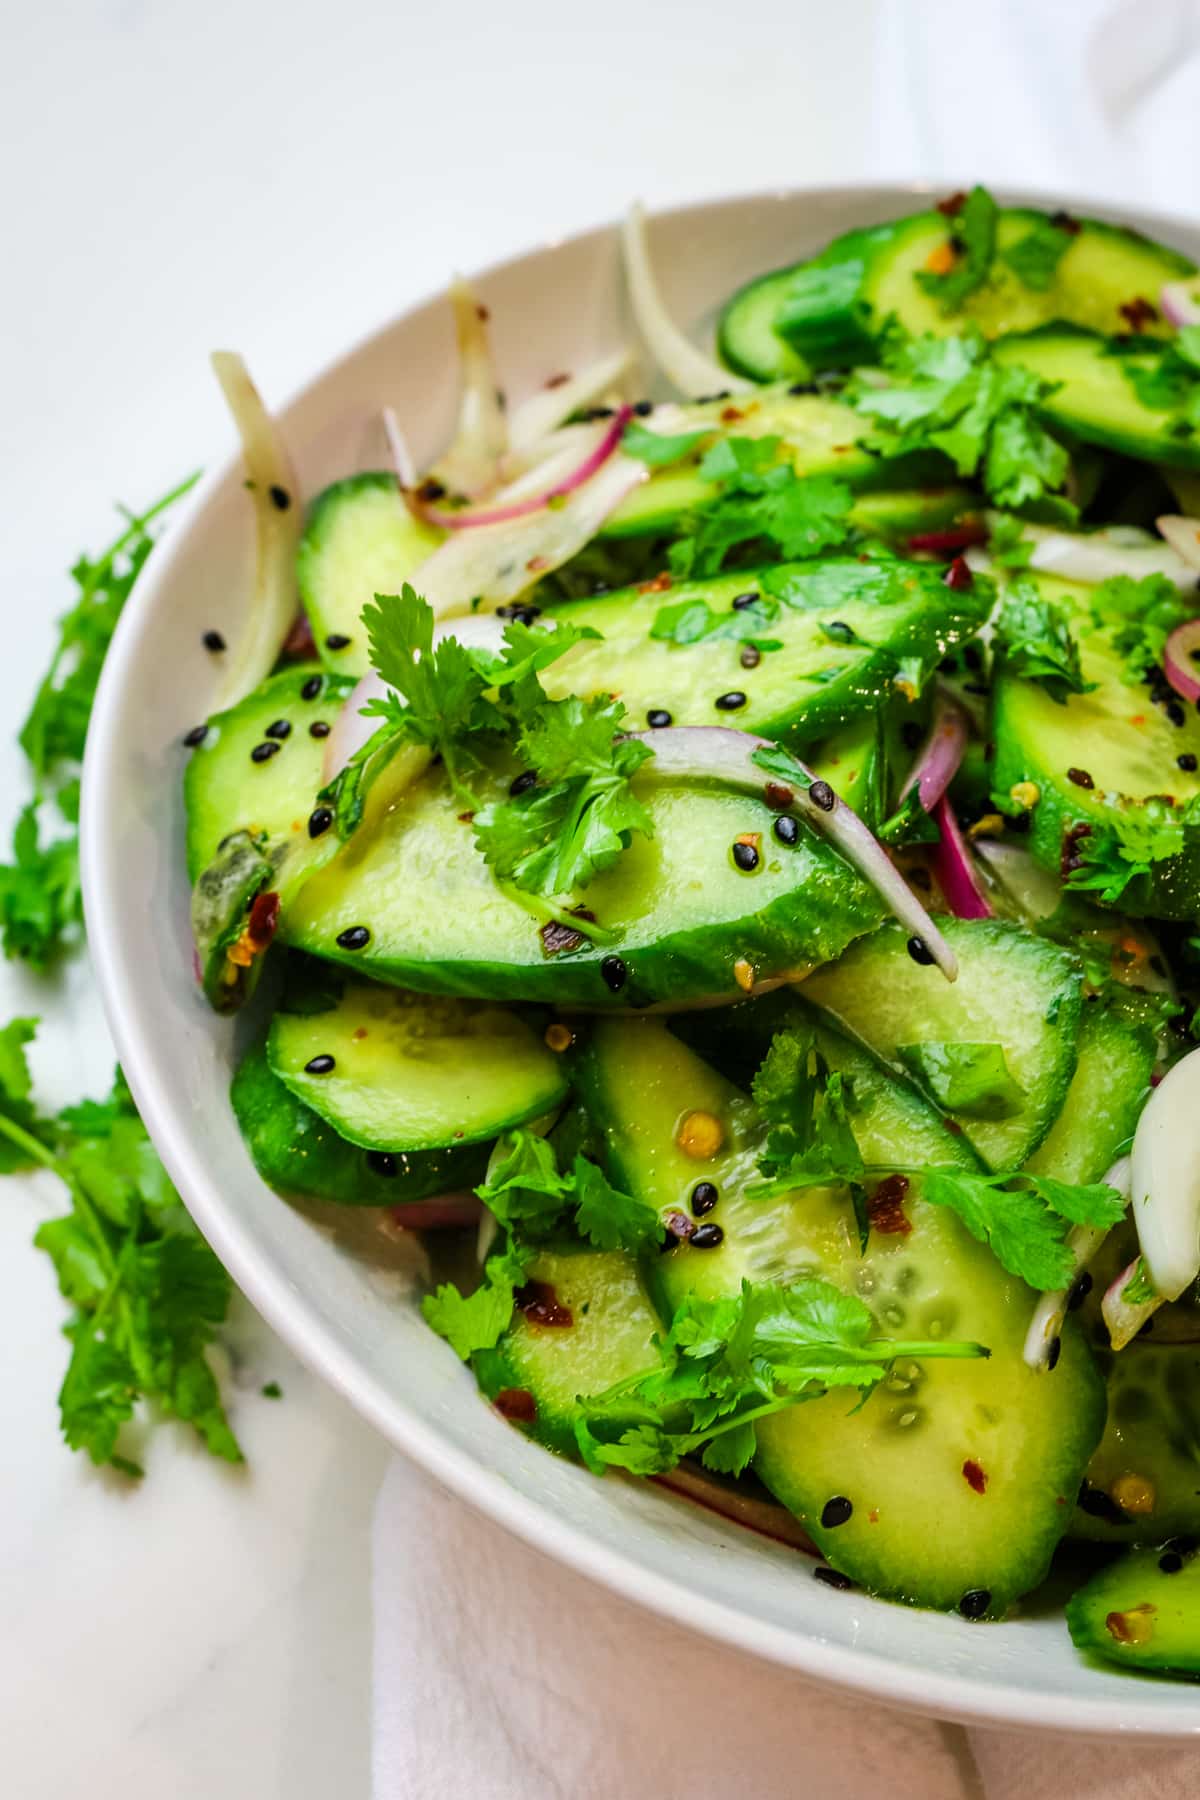 Cucumber and fresh cilantro with red onion and black sesame seeds salad in a white bowl.